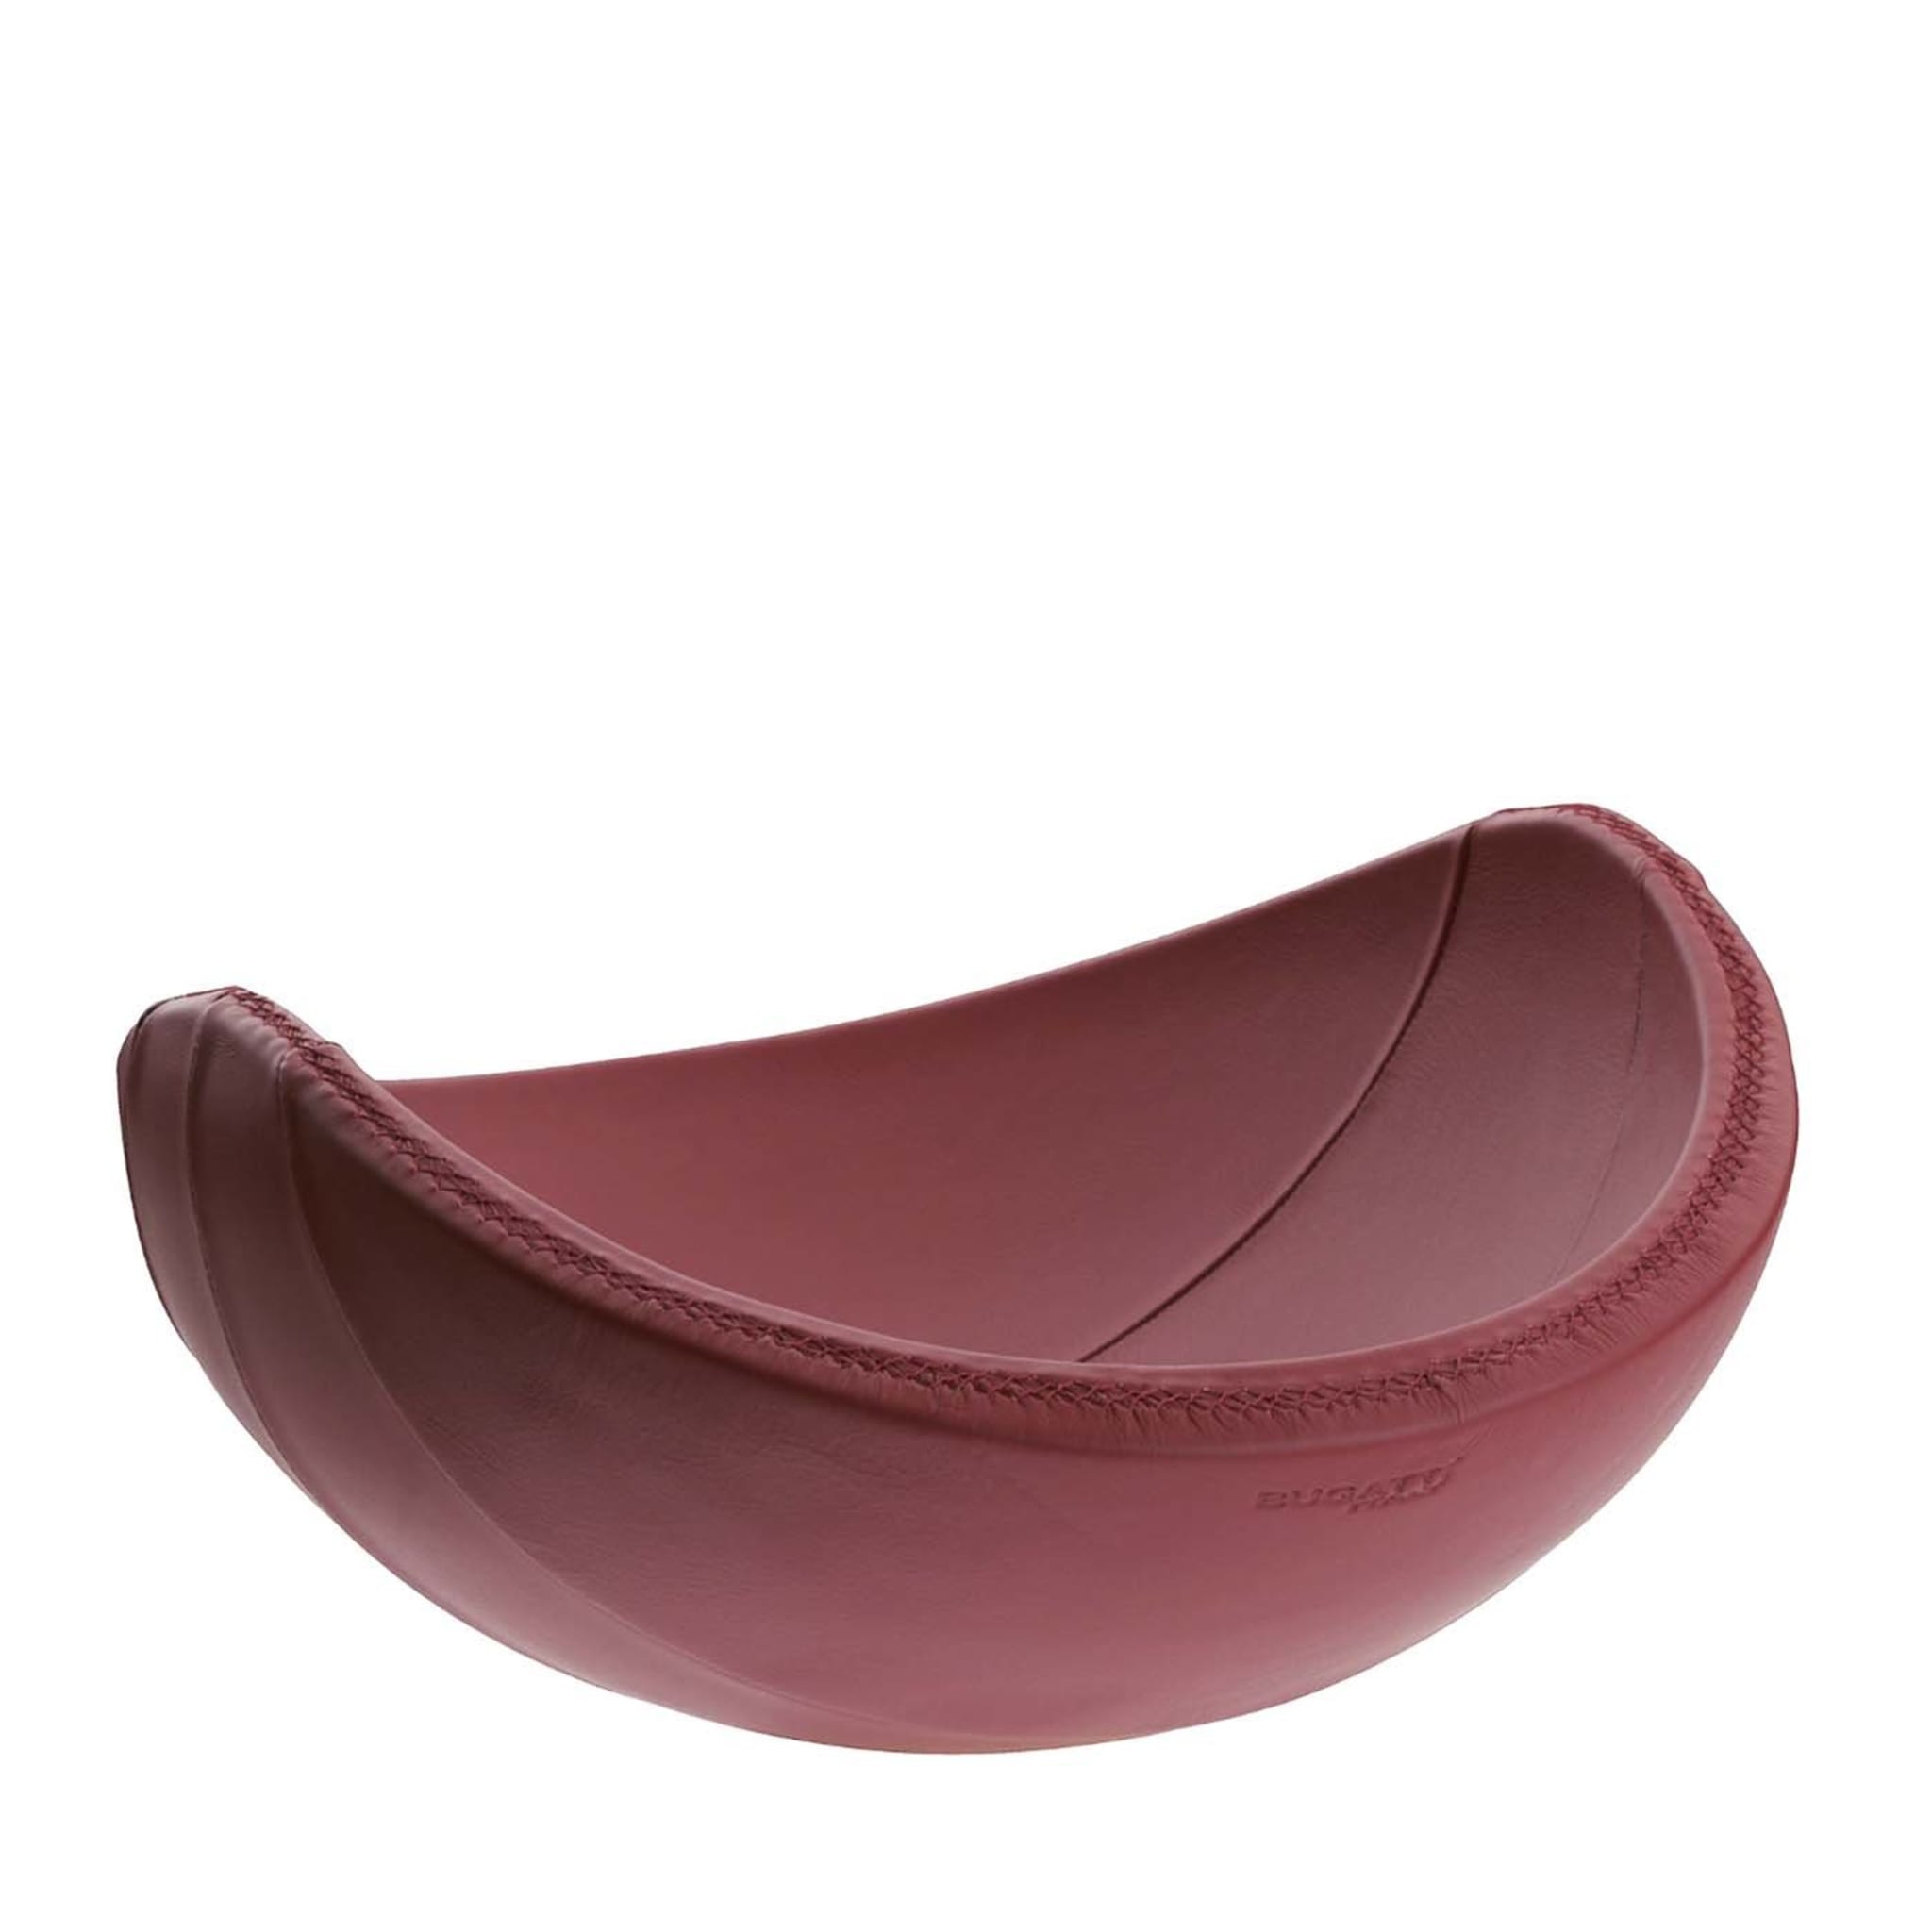 Ninna Nanna Fruit Bowl in Bordeaux Leather - Main view